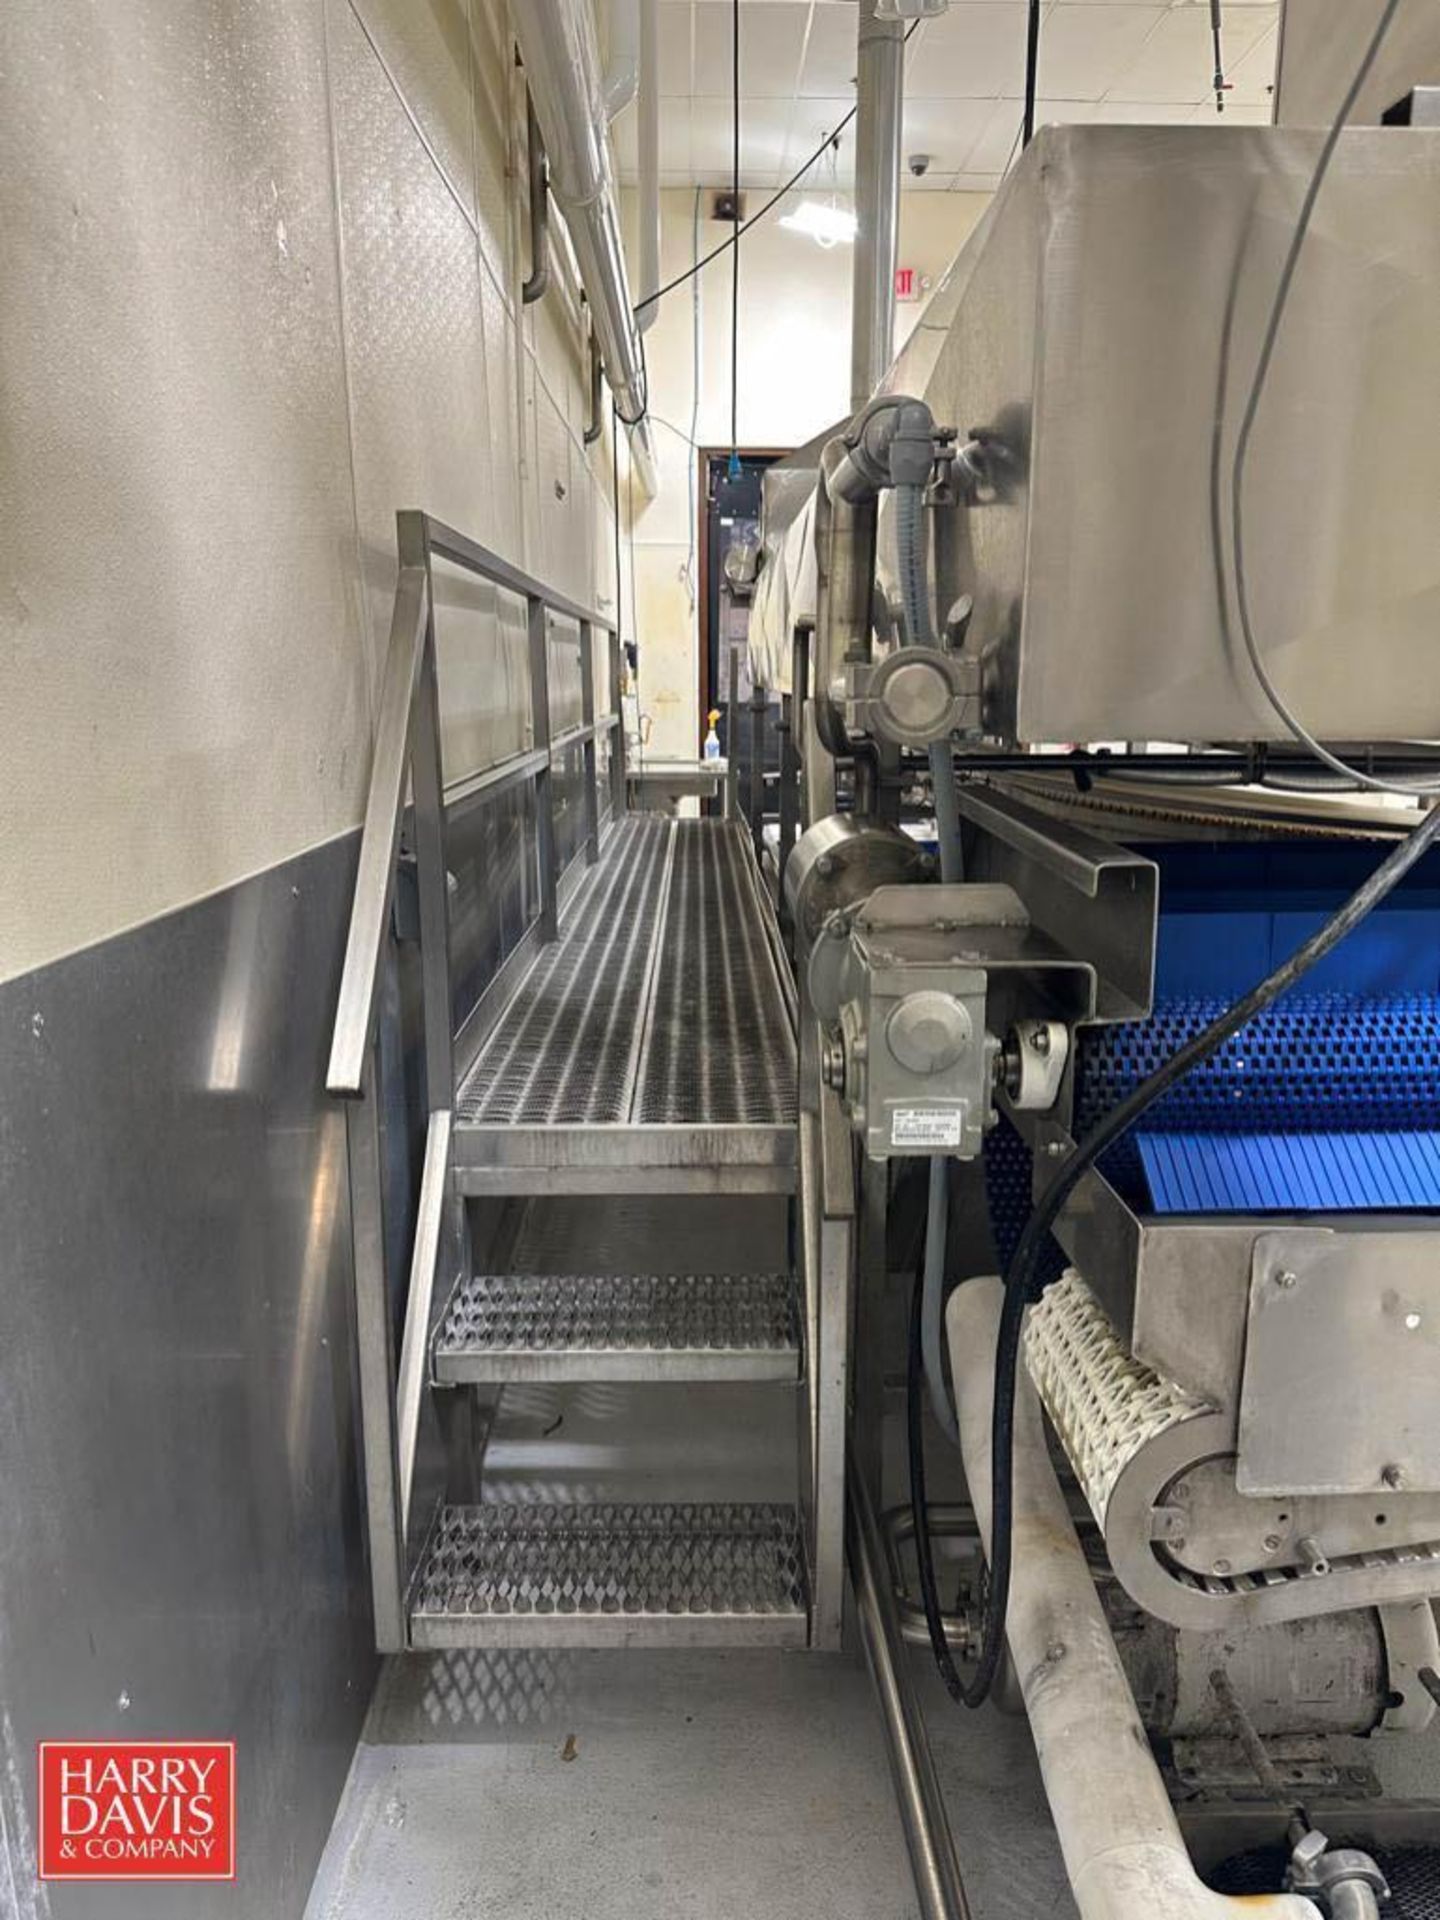 S/S Pasteurizing/Cooling Tunnel: 13.5’ x 45” with Drives, Plastic Tabletop Chain, Conveyor with (2) - Image 5 of 5